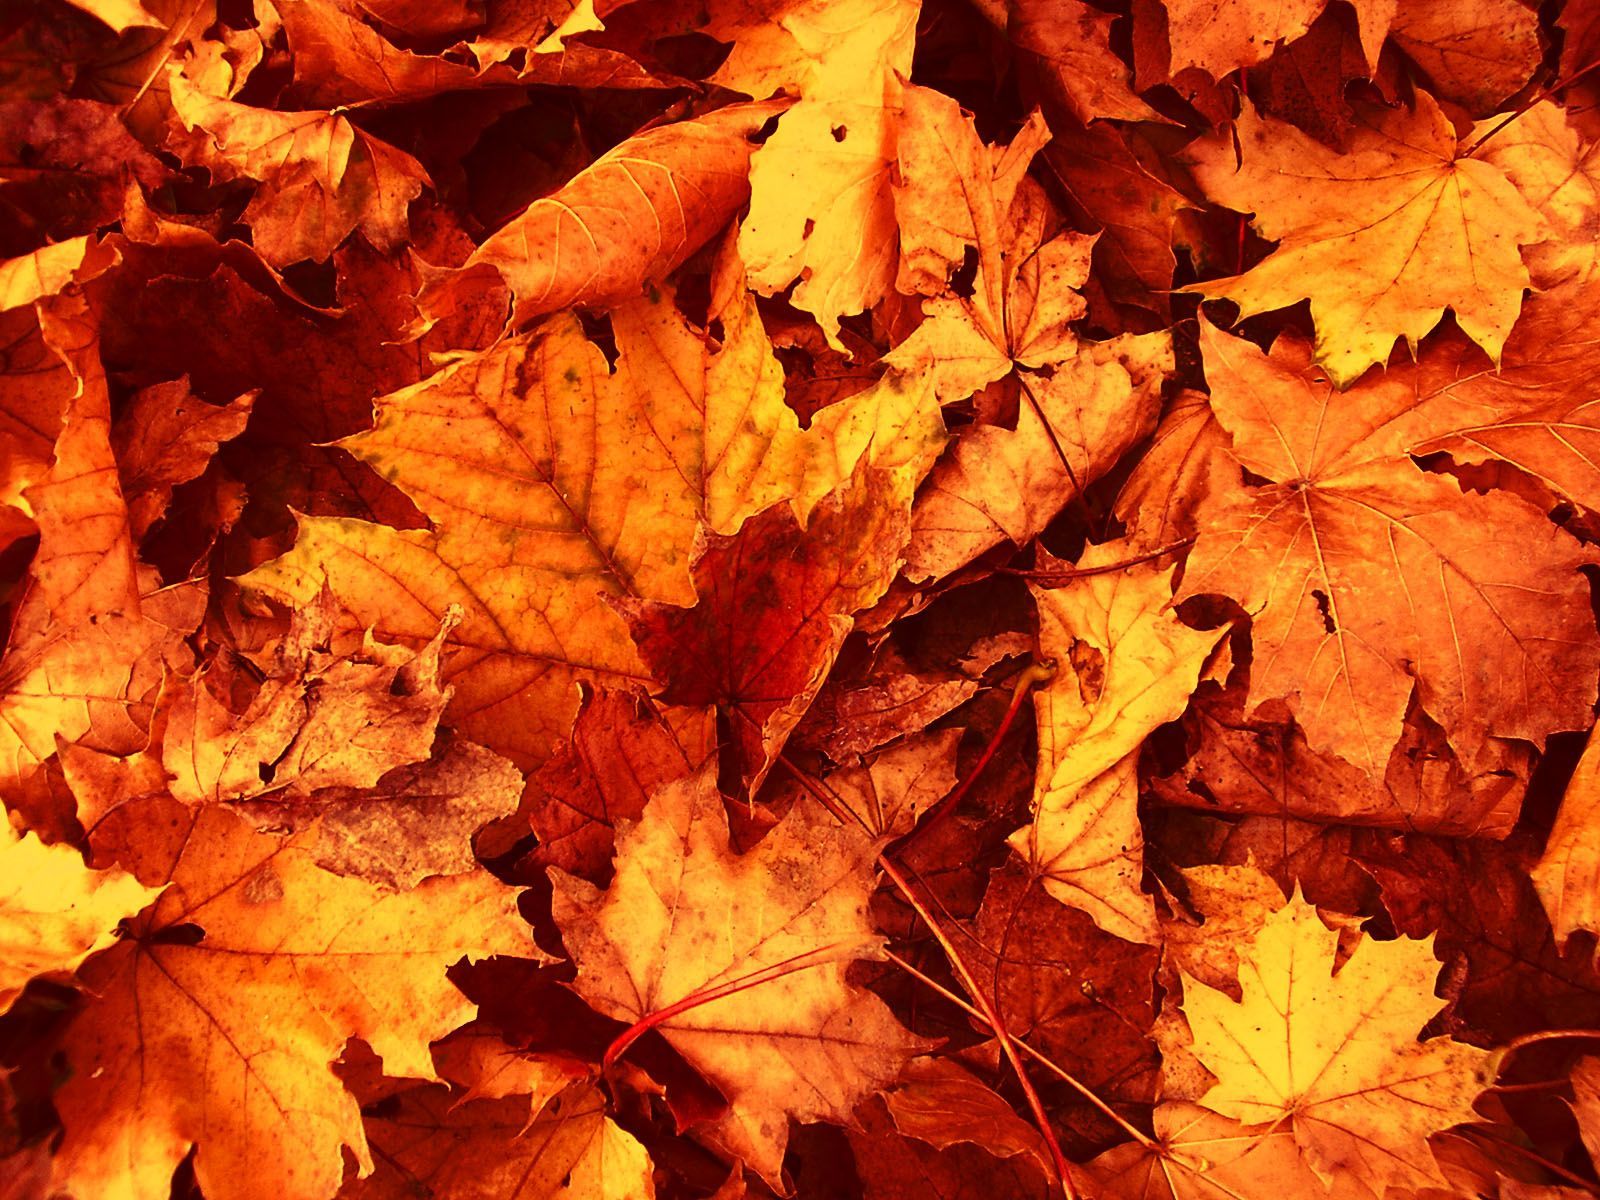 best ideas about Fall Leaves Wallpaper Autumn 1300×1065 Fall Leaf Background 34 W. Autumn leaves wallpaper, Fall leaves background, Fall wallpaper